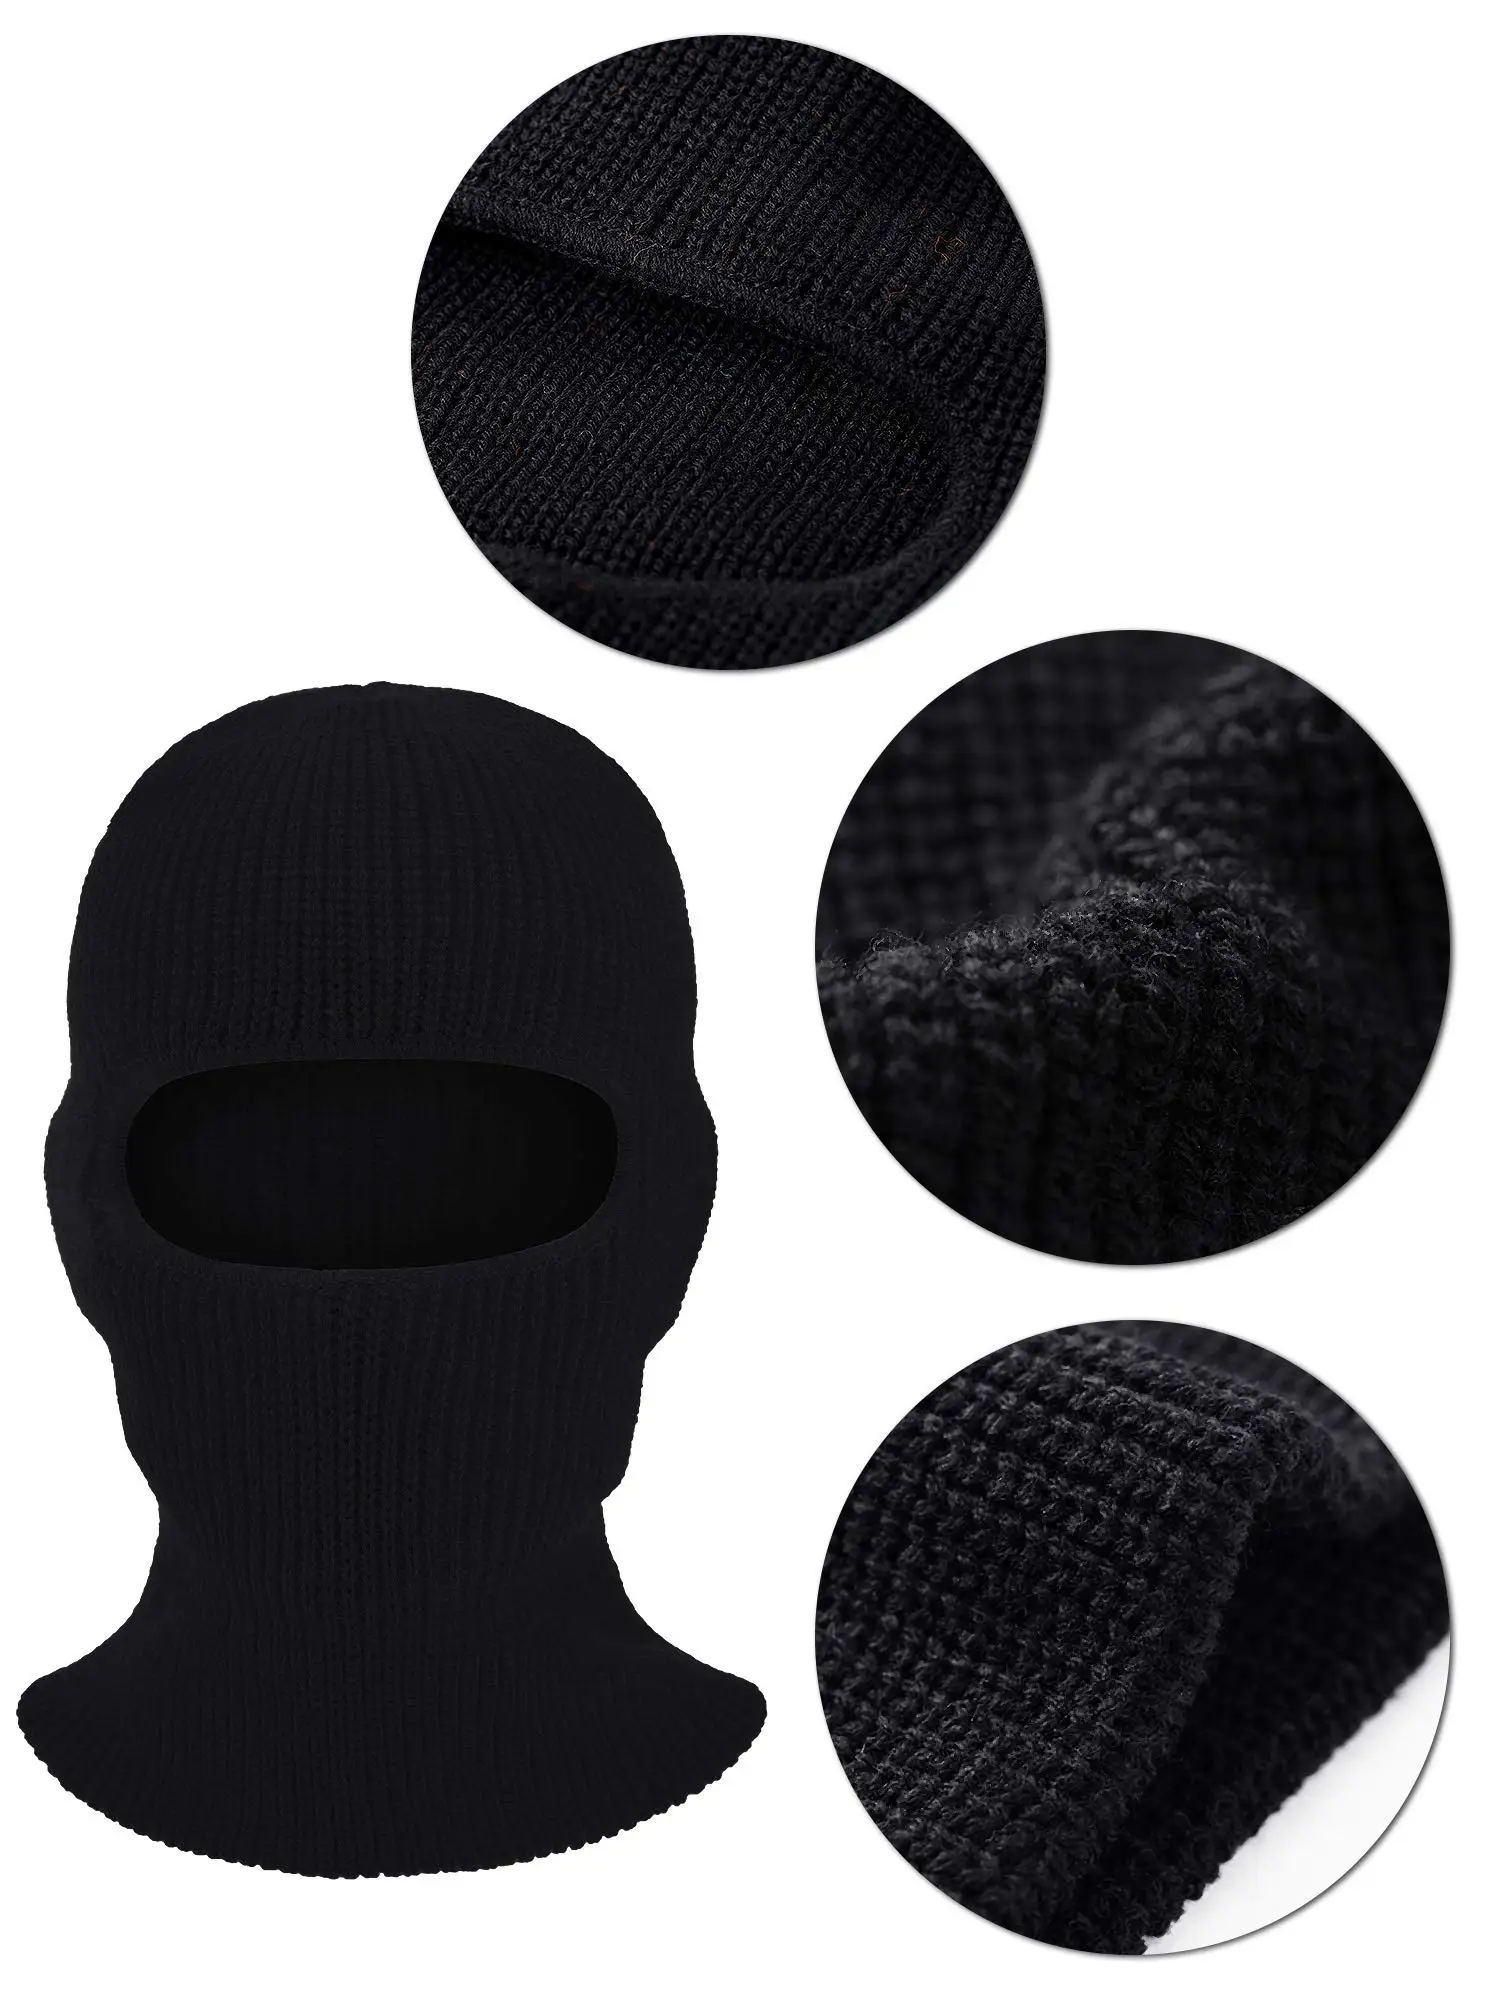 1-Hole Ski Mask Knitted Hat Face Cover Winter Warm Balaclava Bonnet Outdoor Sports Beanies Funny Party Riding Cap winter cap for men Skullies & Beanies